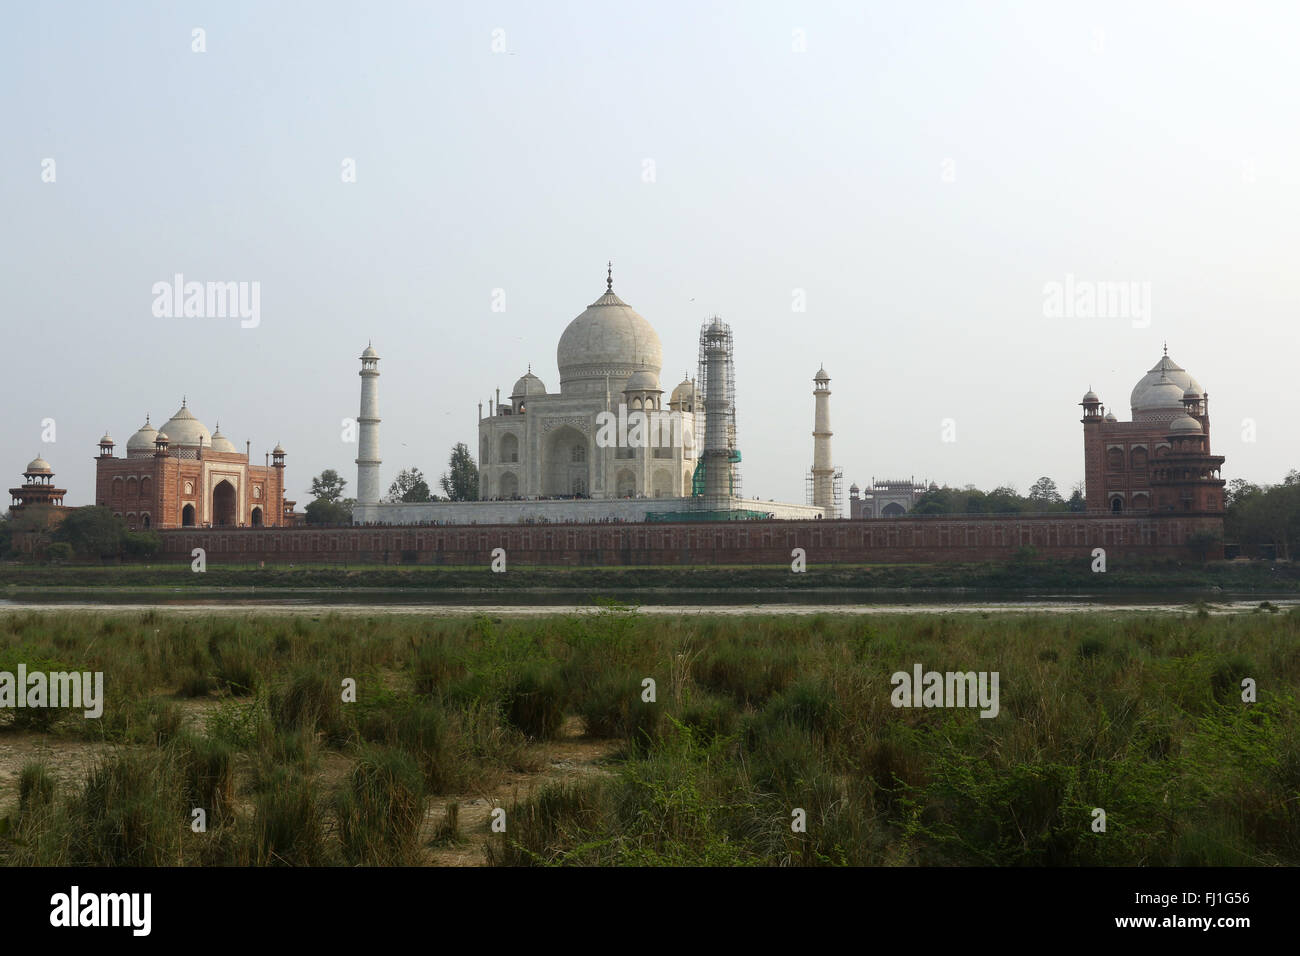 This is the back of the Taj Mahal from the opposite side of the Yamuna River Agra, India Photo by Palash Khan Stock Photo